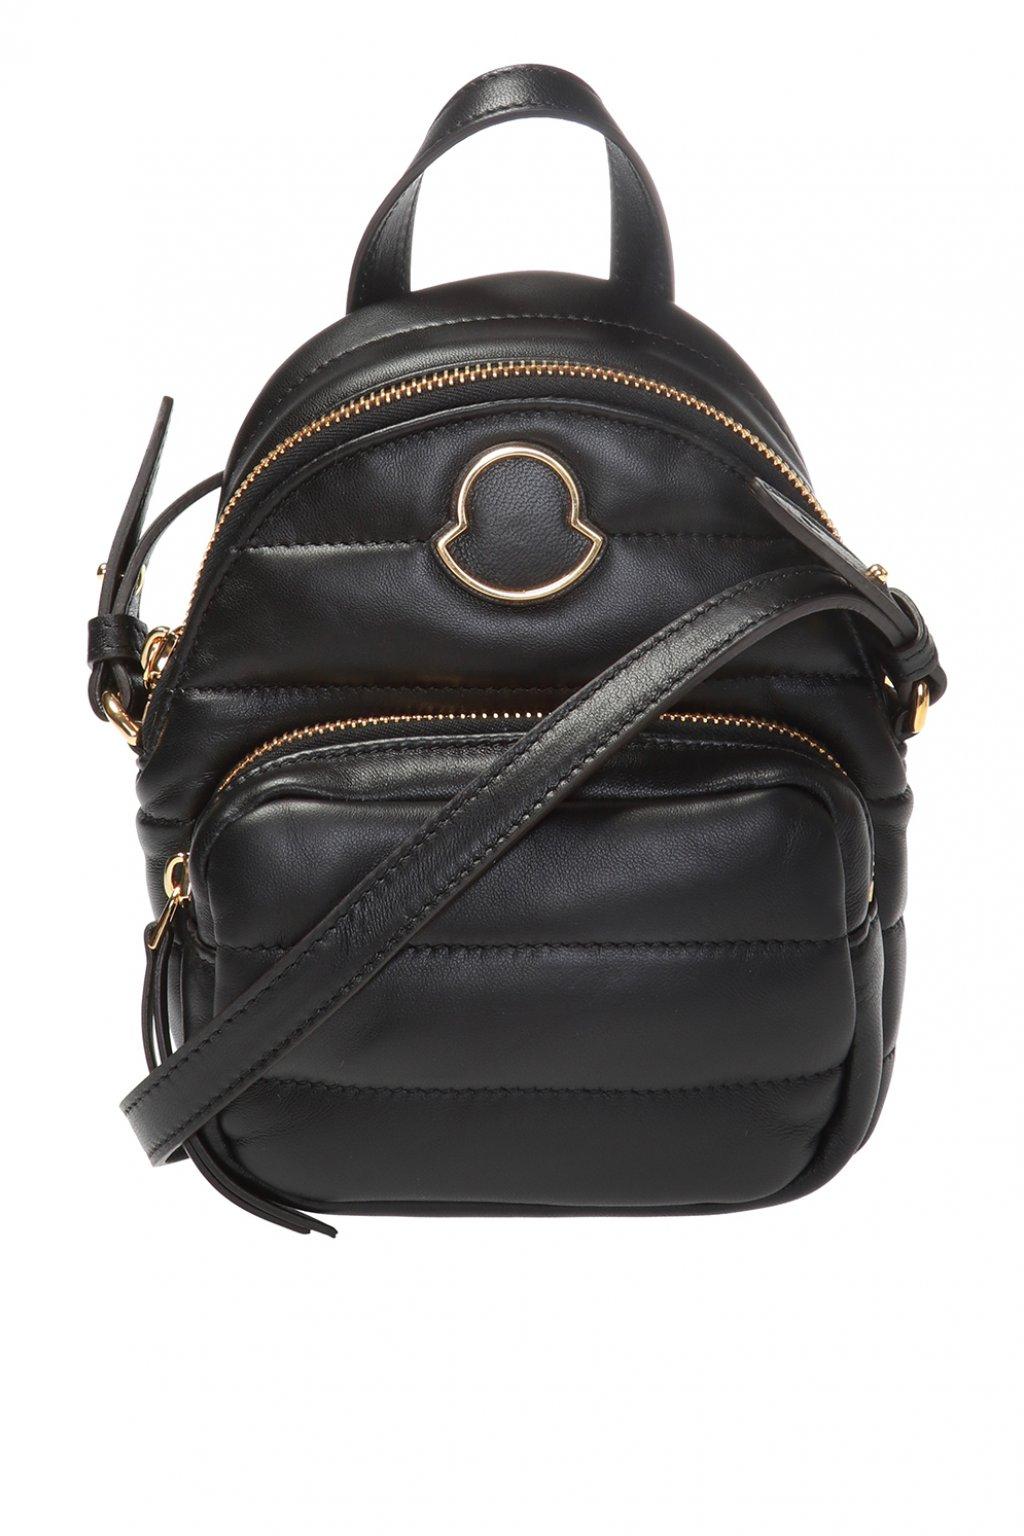 Moncler Kilia Small Leather Backpack in Black - Lyst